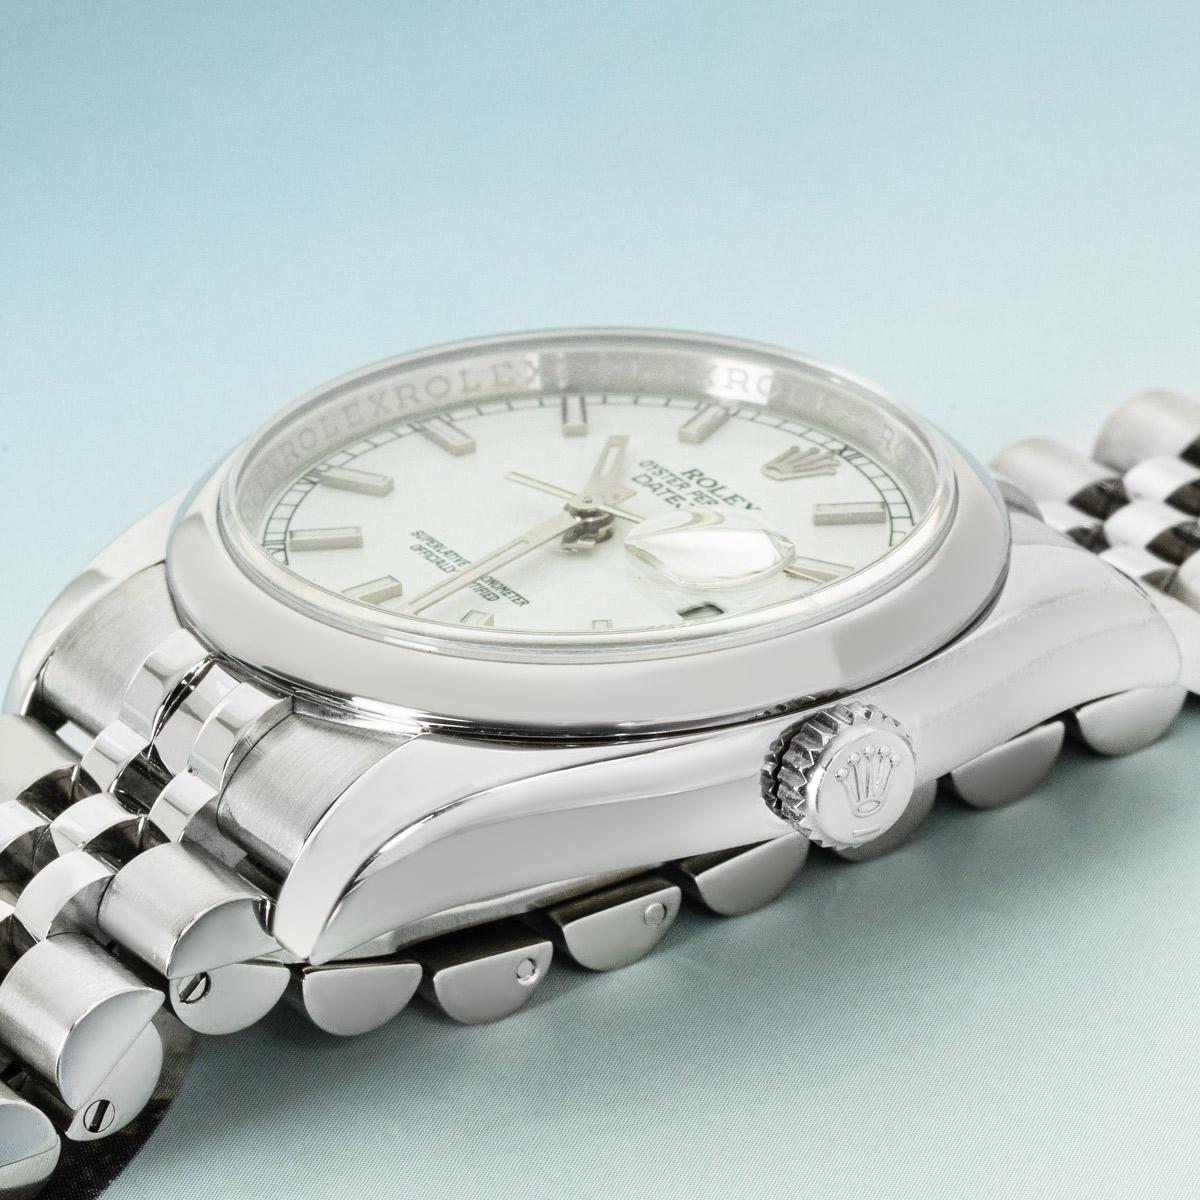 A steel 36mm Datejust by Rolex. Features a white dial with applied hour markers and a smooth fixed stainless steel bezel. Fitted with a sapphire glass and a self-winding automatic movement. The watch is also equipped with a Jubilee bracelet and a